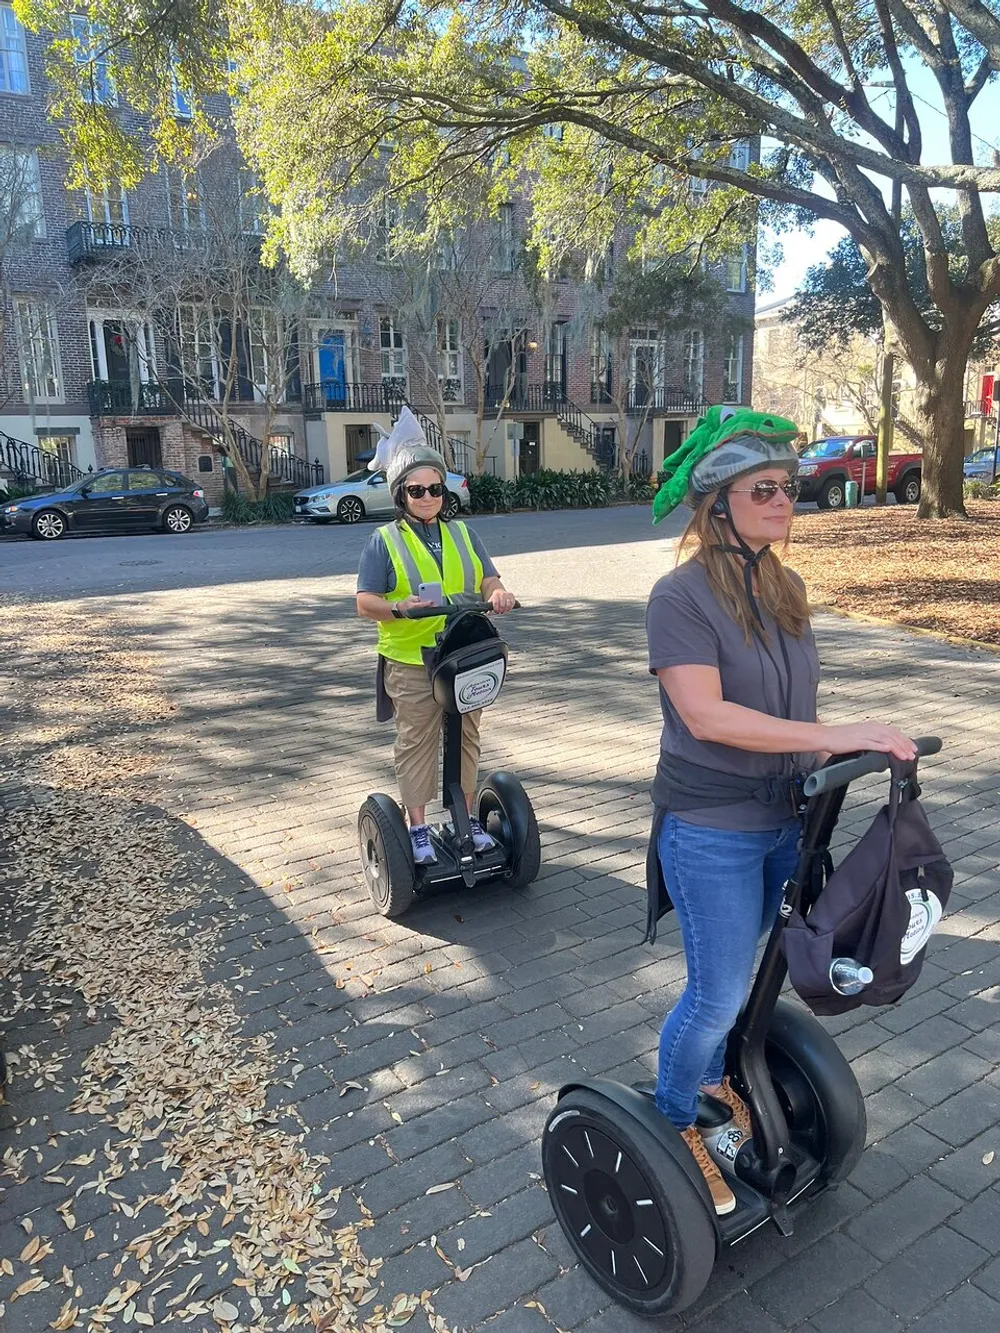 Two people one wearing a helmet with a quirky alligator design and the other sporting a vest are riding Segways on a tree-lined path with historic buildings in the background